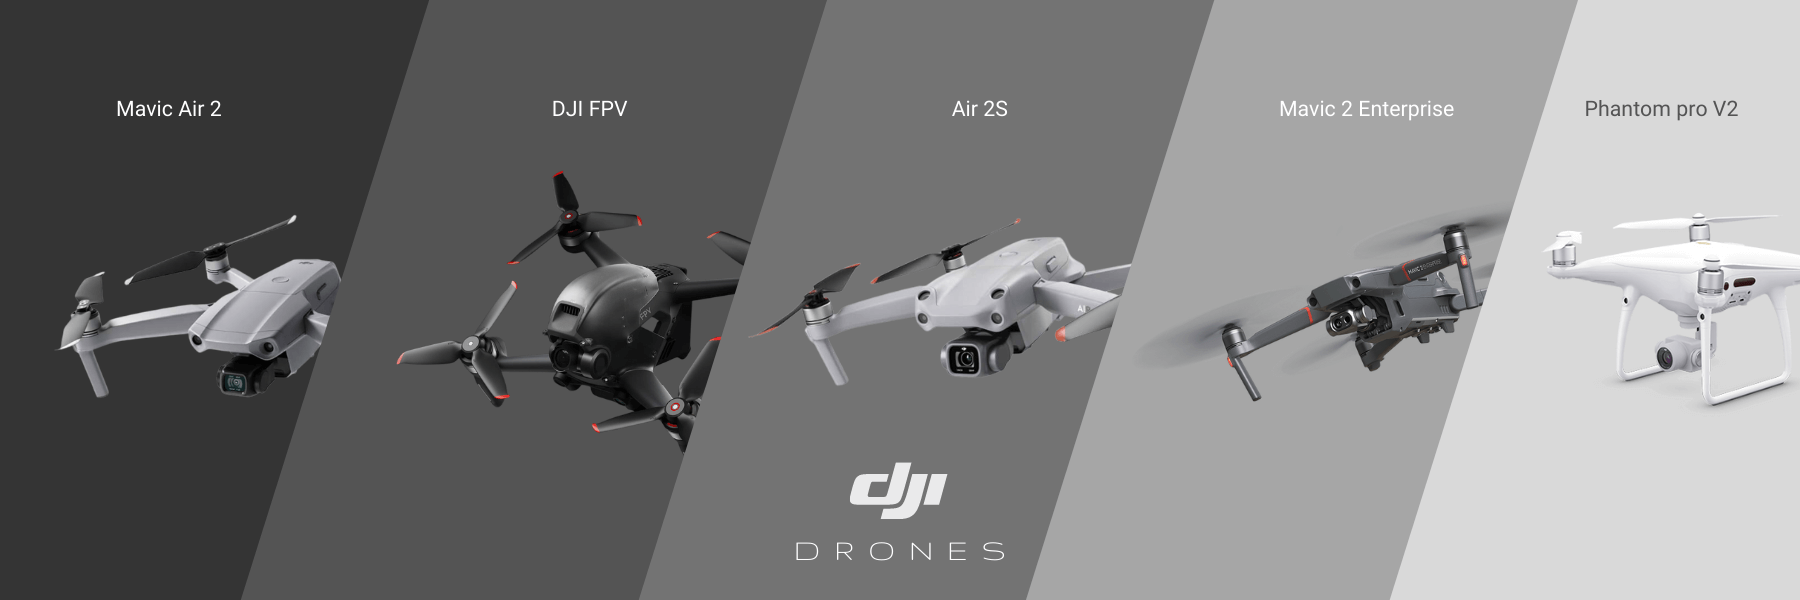 A Complete Guide to DJI Products